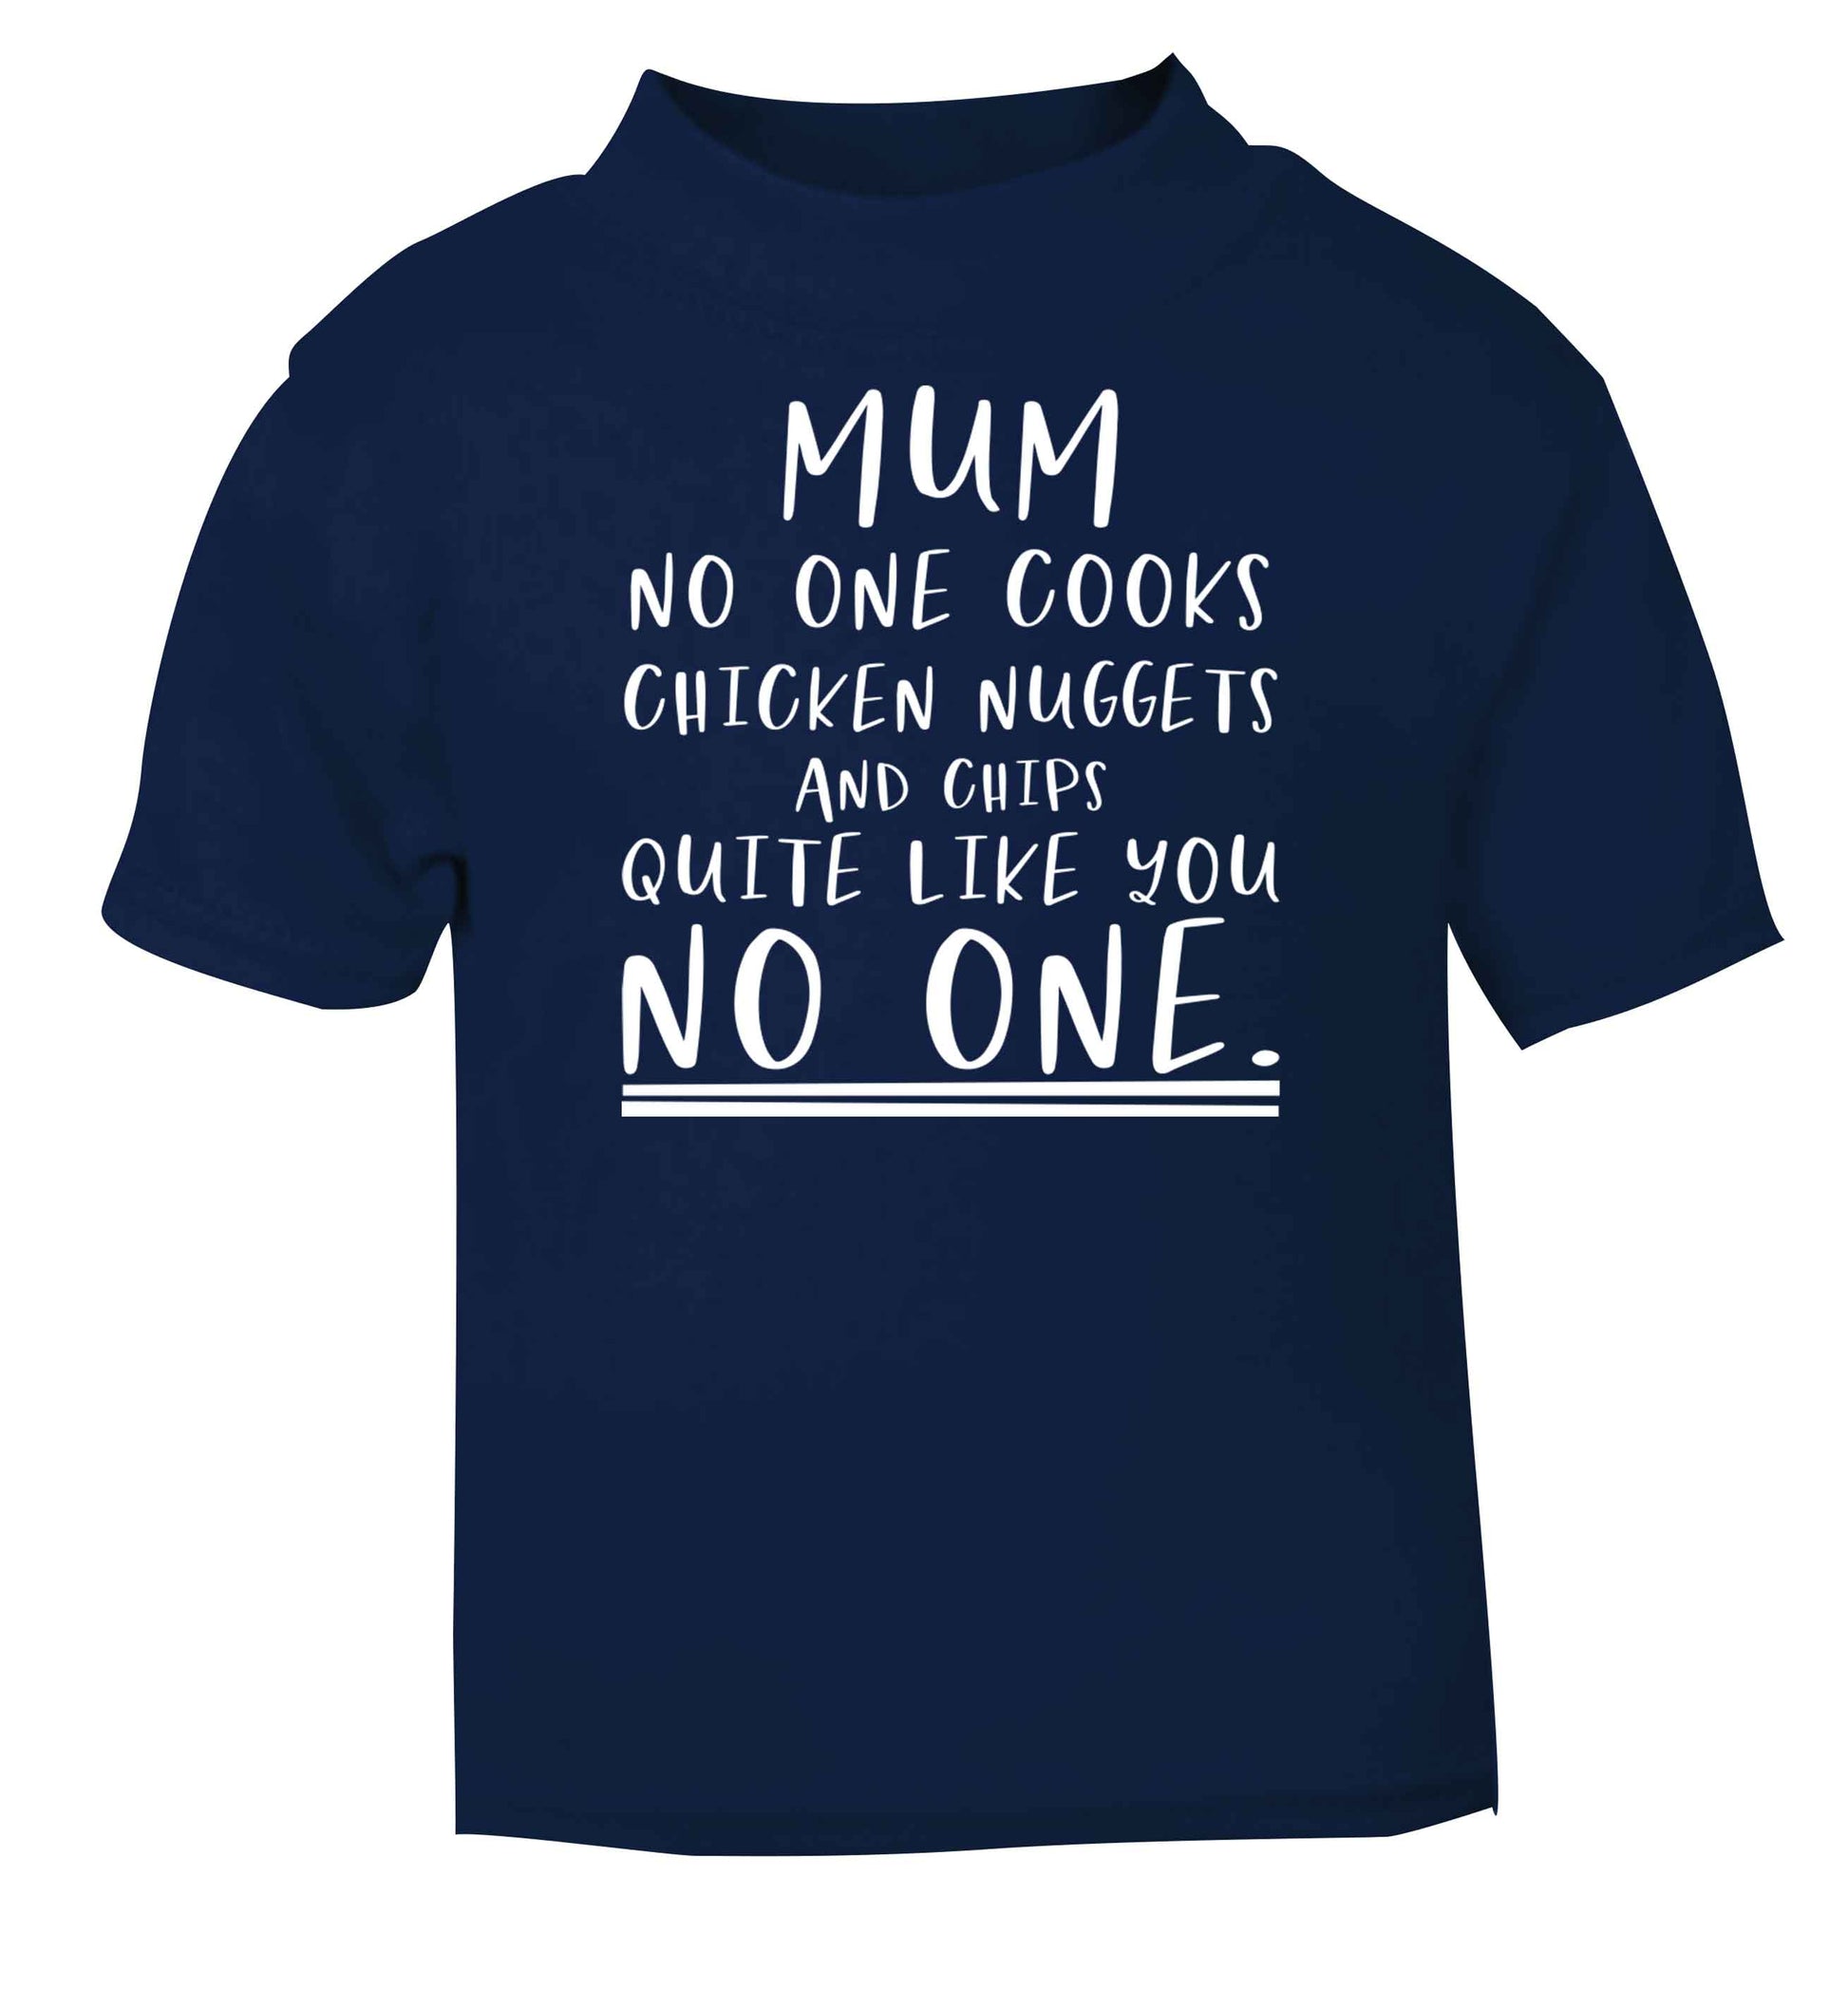 Super funny sassy gift for mother's day or birthday!  Mum no one cooks chicken nuggets and chips like you no one navy baby toddler Tshirt 2 Years